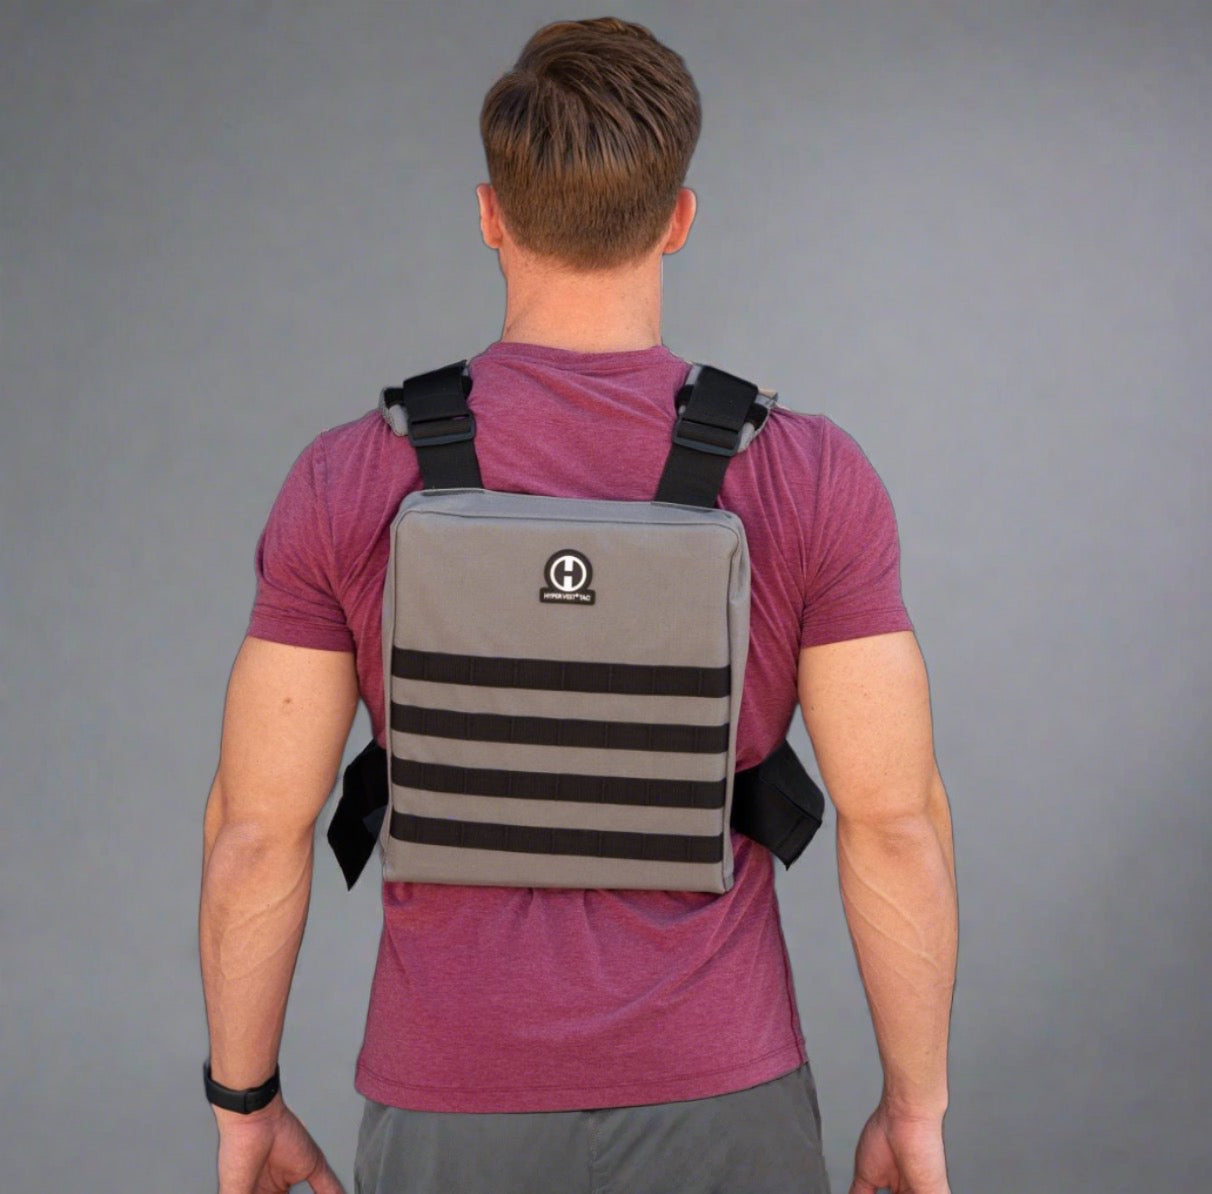 back view of male athlete wearing a Hyper Vest Tactical Weighted Vest